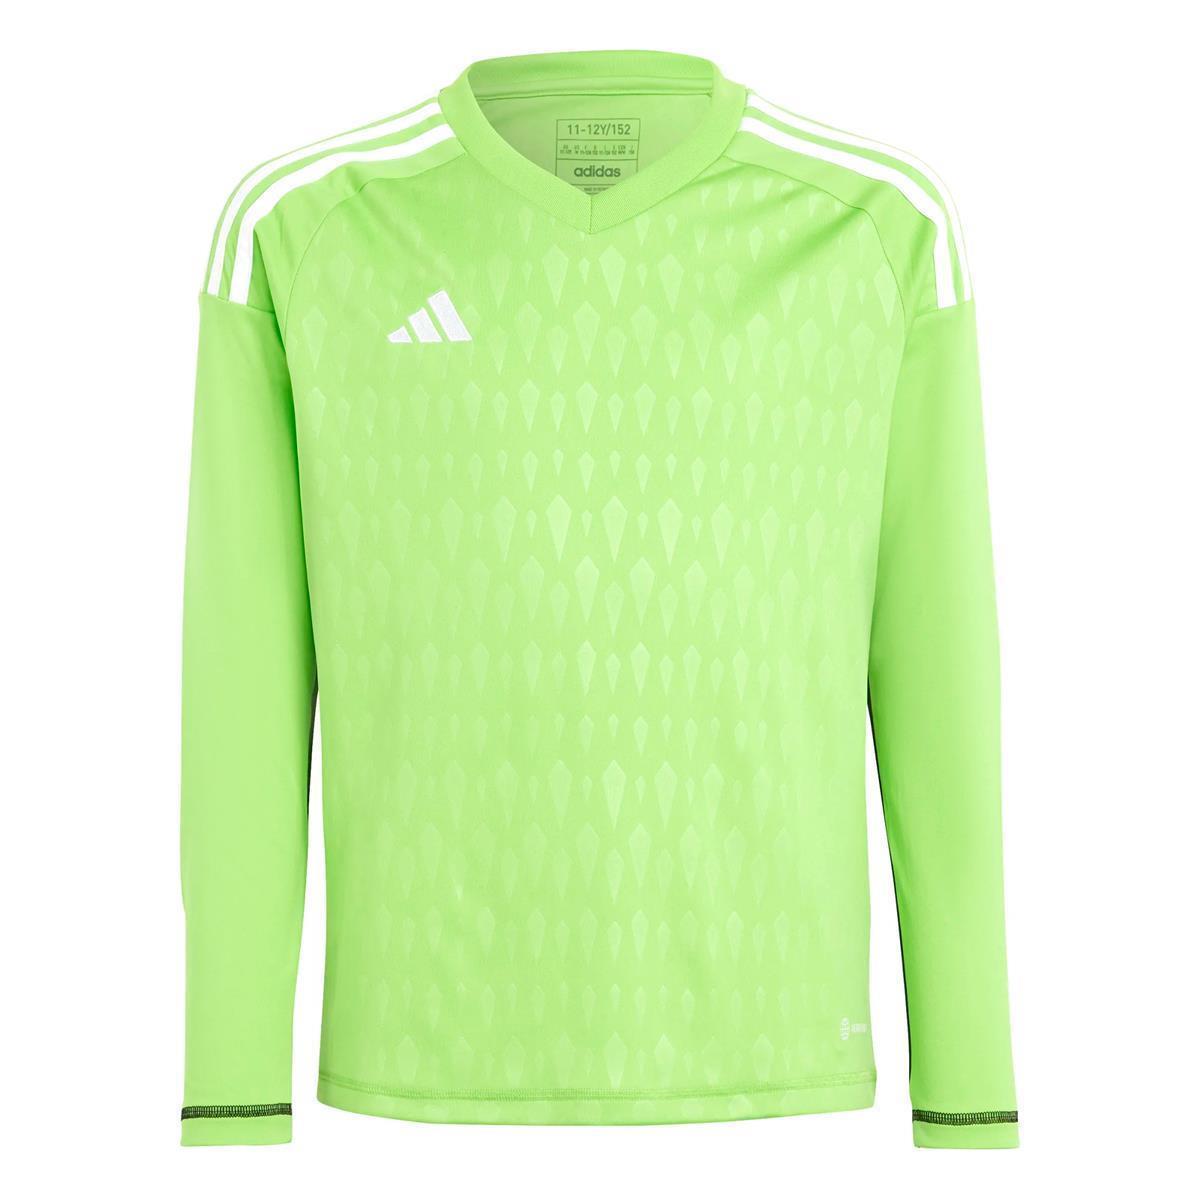 ADIDAS T23 COMPETITION GK JERSEY LS YOUTH TEAM SEMI SOLAR GREEN